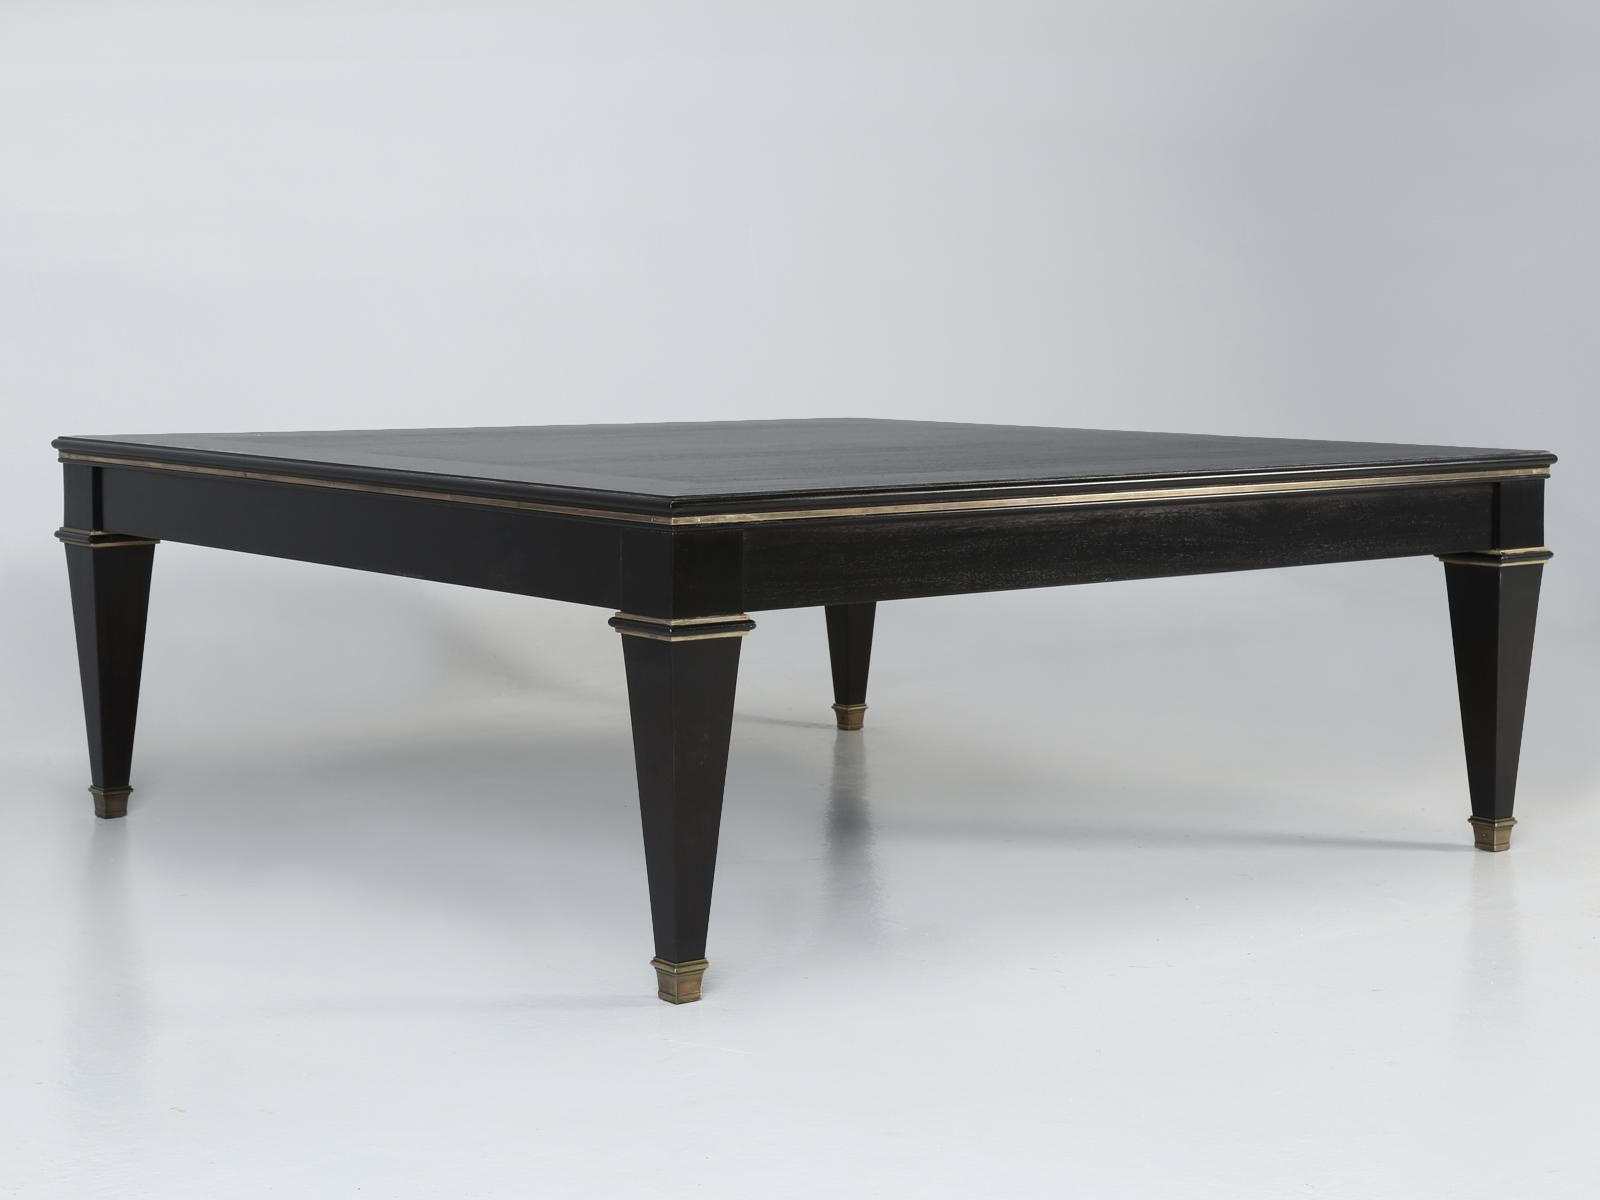 French Maison Jansen or Directoire style coffee table that in our home, might more accurately be described as a cocktail table. This particular Maison Jansen or Directoire style coffee table, is just another creative product from our Old Plank